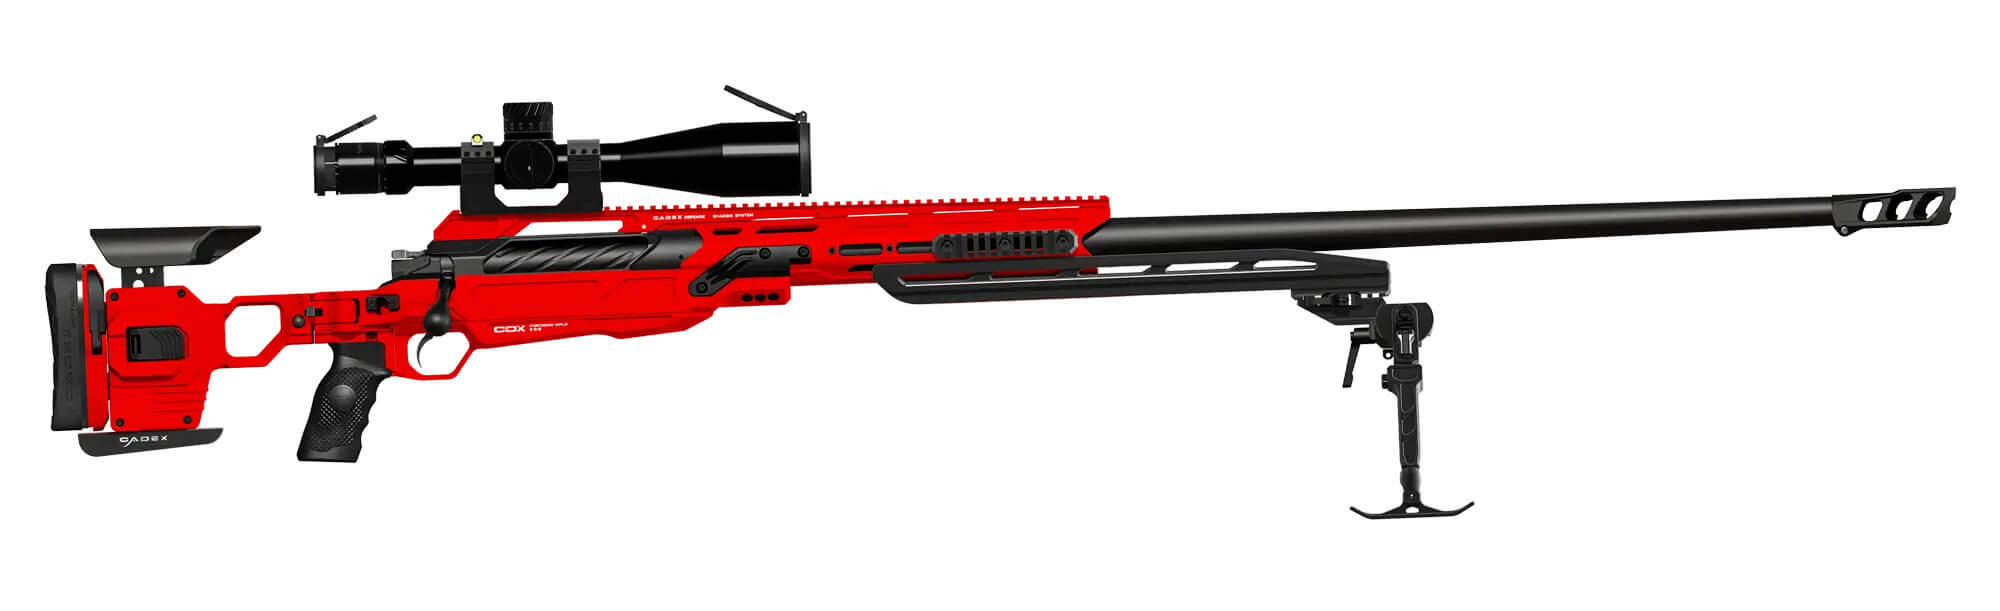 Cadex CDX-50 Tremor Series Rifle - Customized to your specs (CDX50-DUAL)